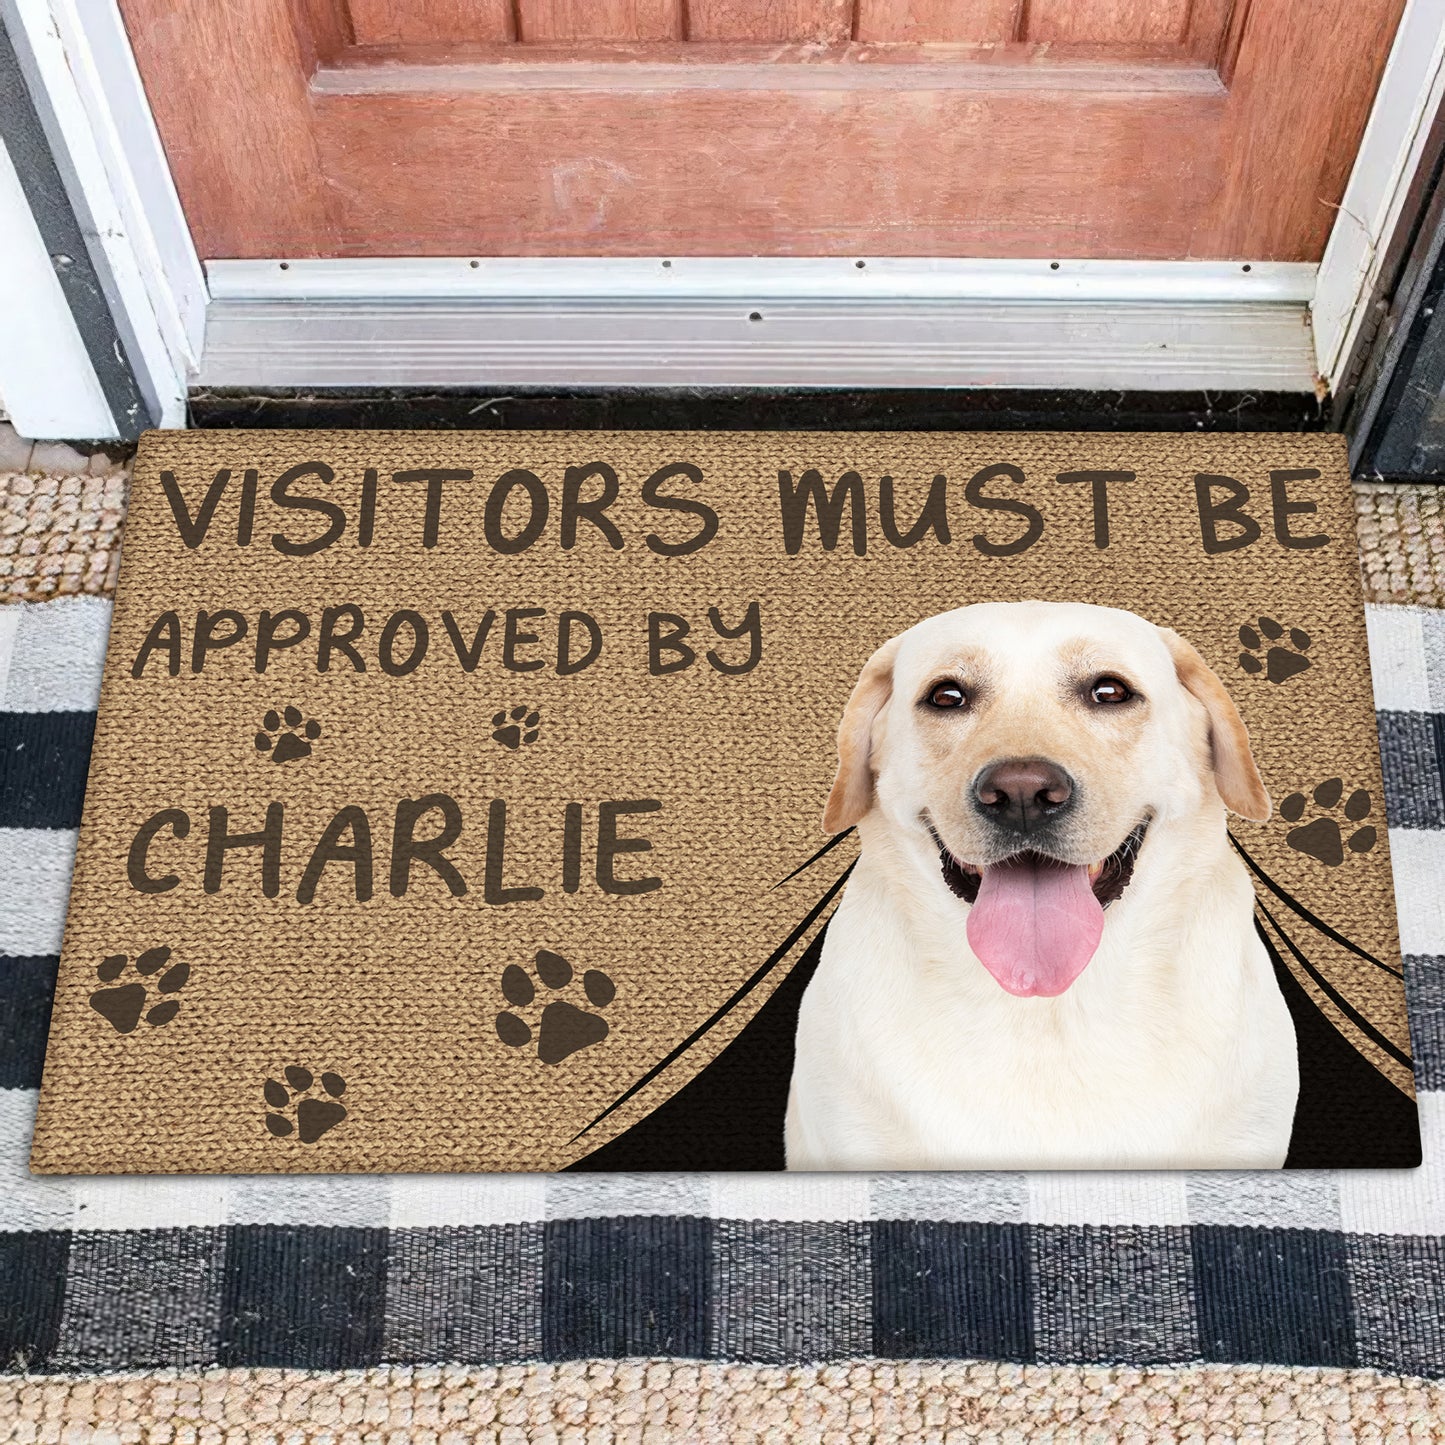 Pet Lover - Visitors Must Be Approved By This Dog - Personalized Doormat